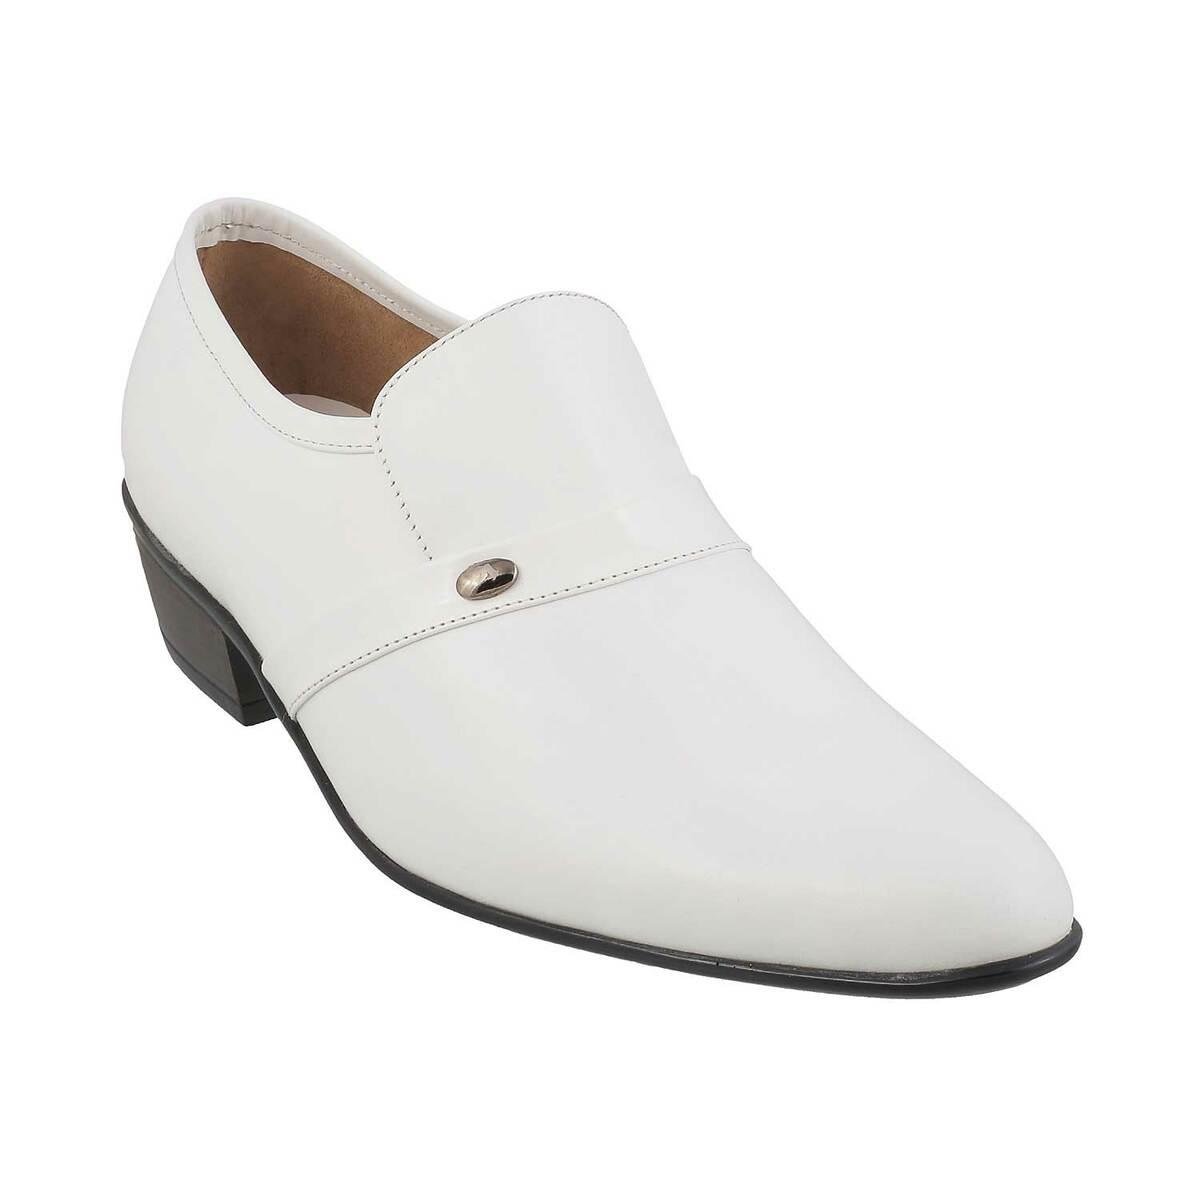 White & Ivory Shoes | Leather Shoes | Formal shoes, Boots | Alligator shoes  men, Ivory shoes, Dress shoes